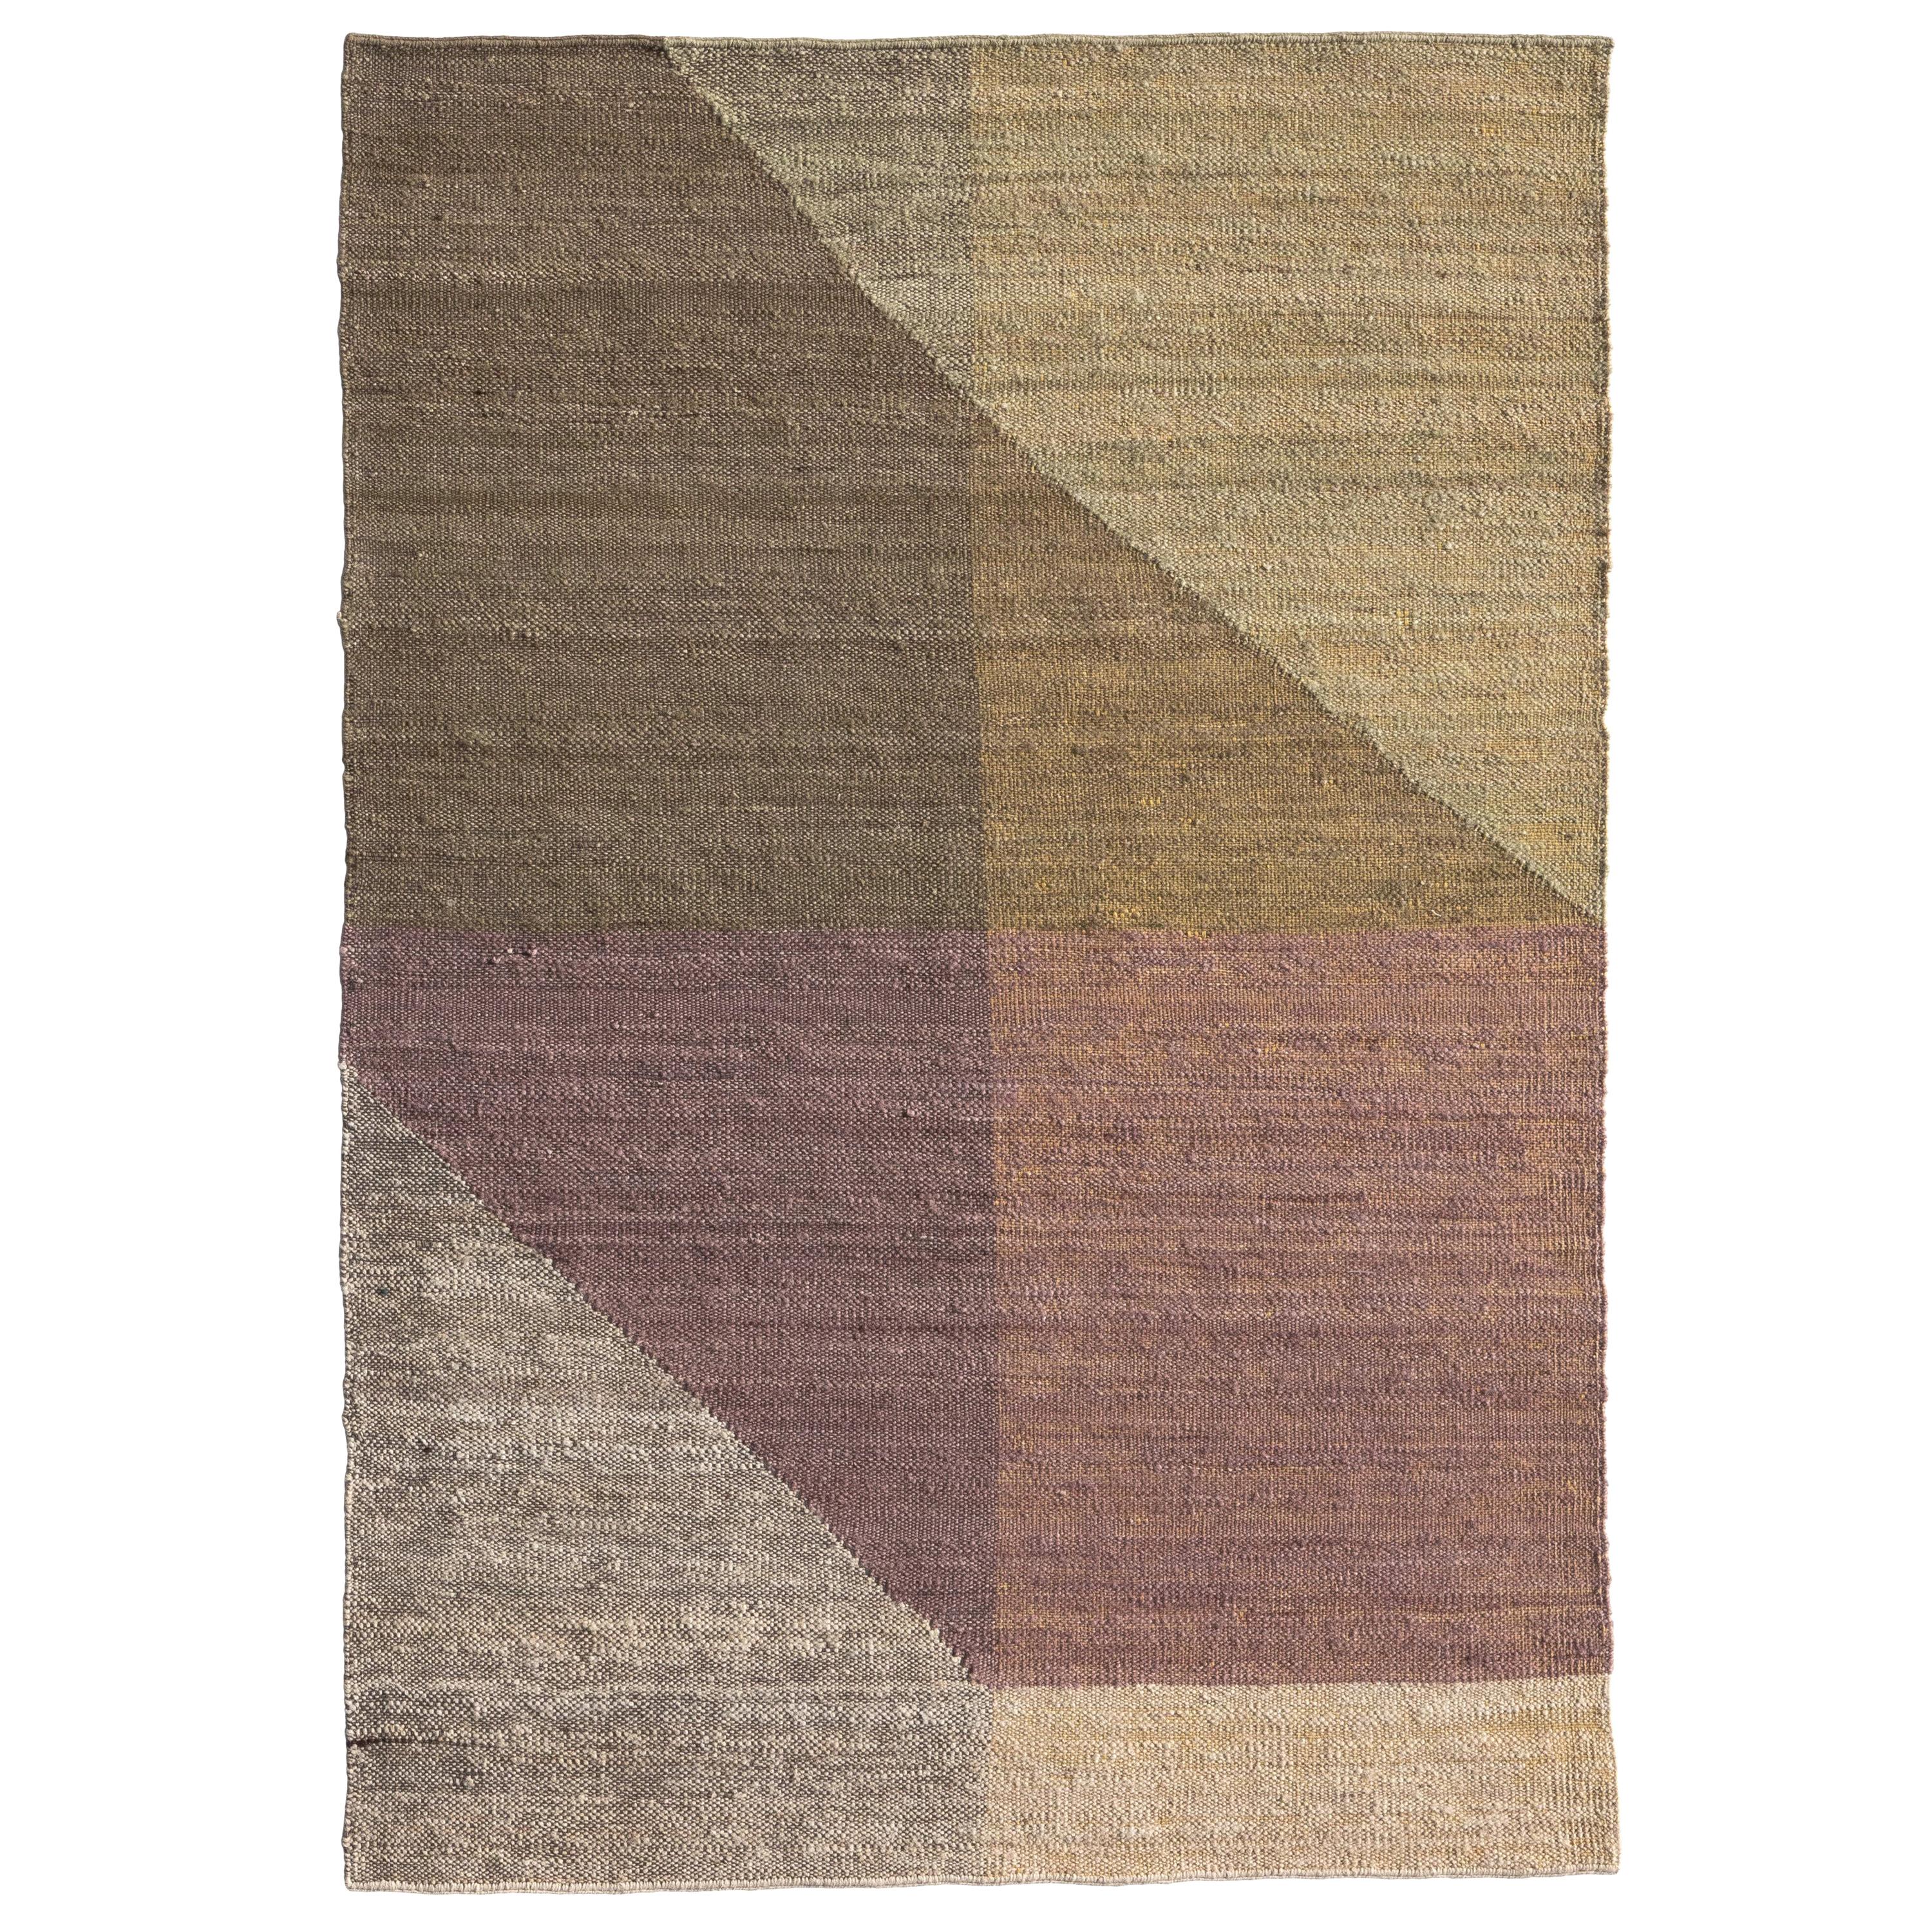 Nanimarquina Capas 5 Standard Rug in Beige by Mathias Hahn, Small For Sale